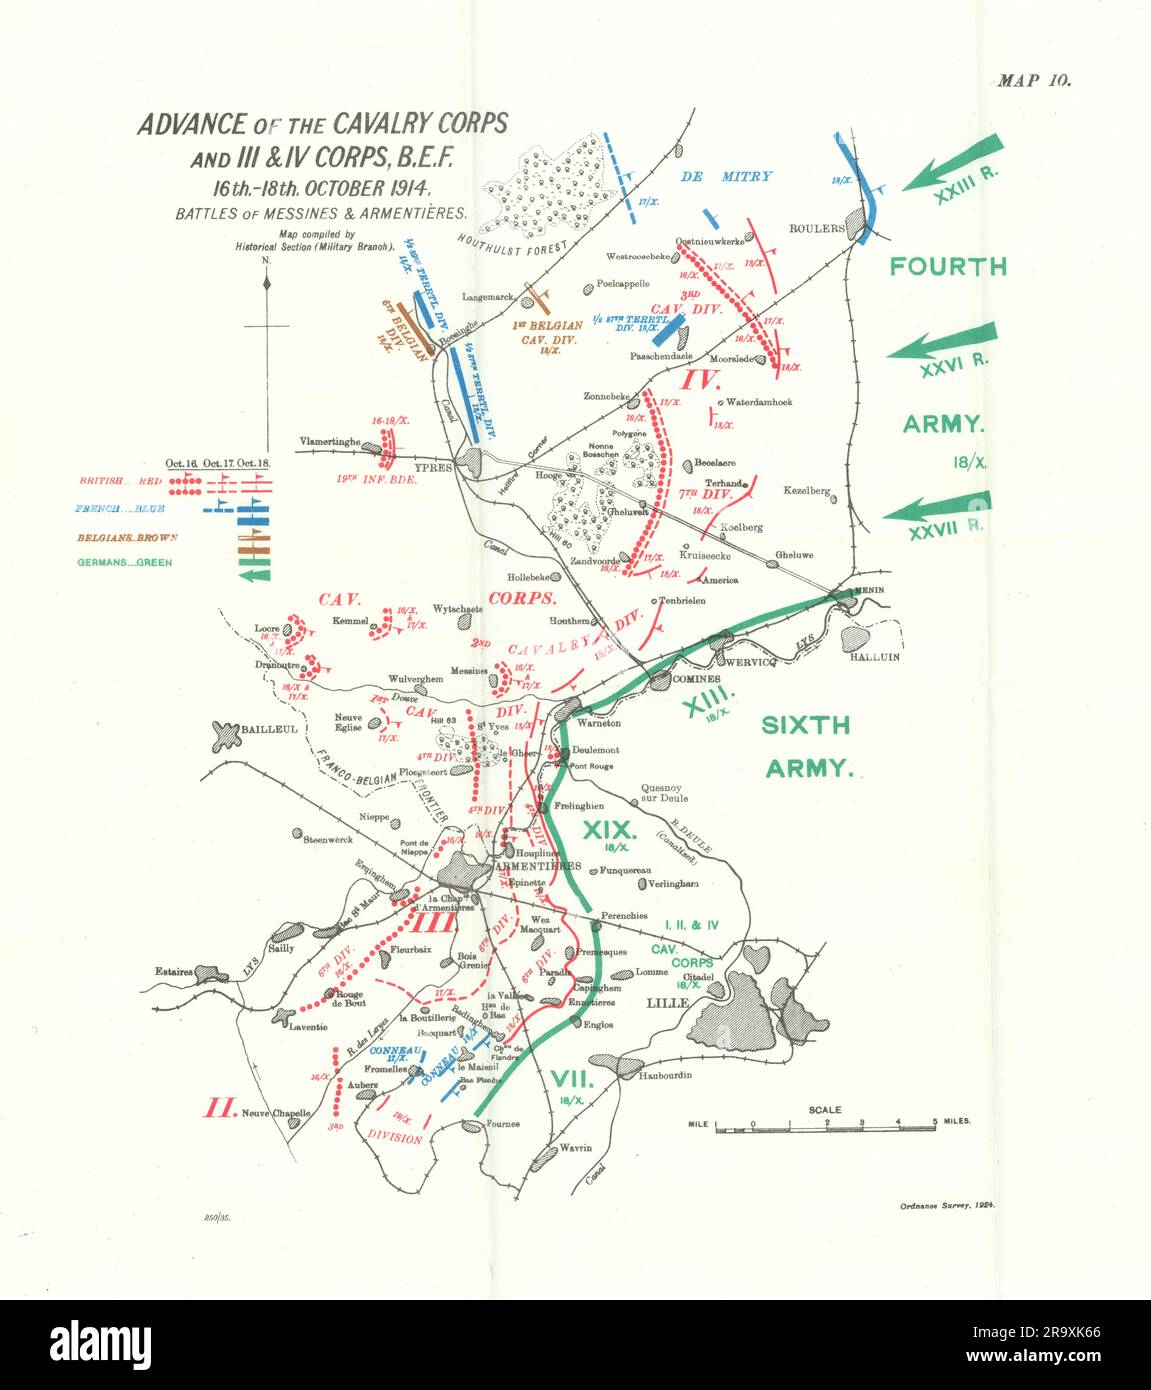 Battles of Messines & Armentières. Advance 16-18th October 1914. WW1. 1933 map Stock Photo